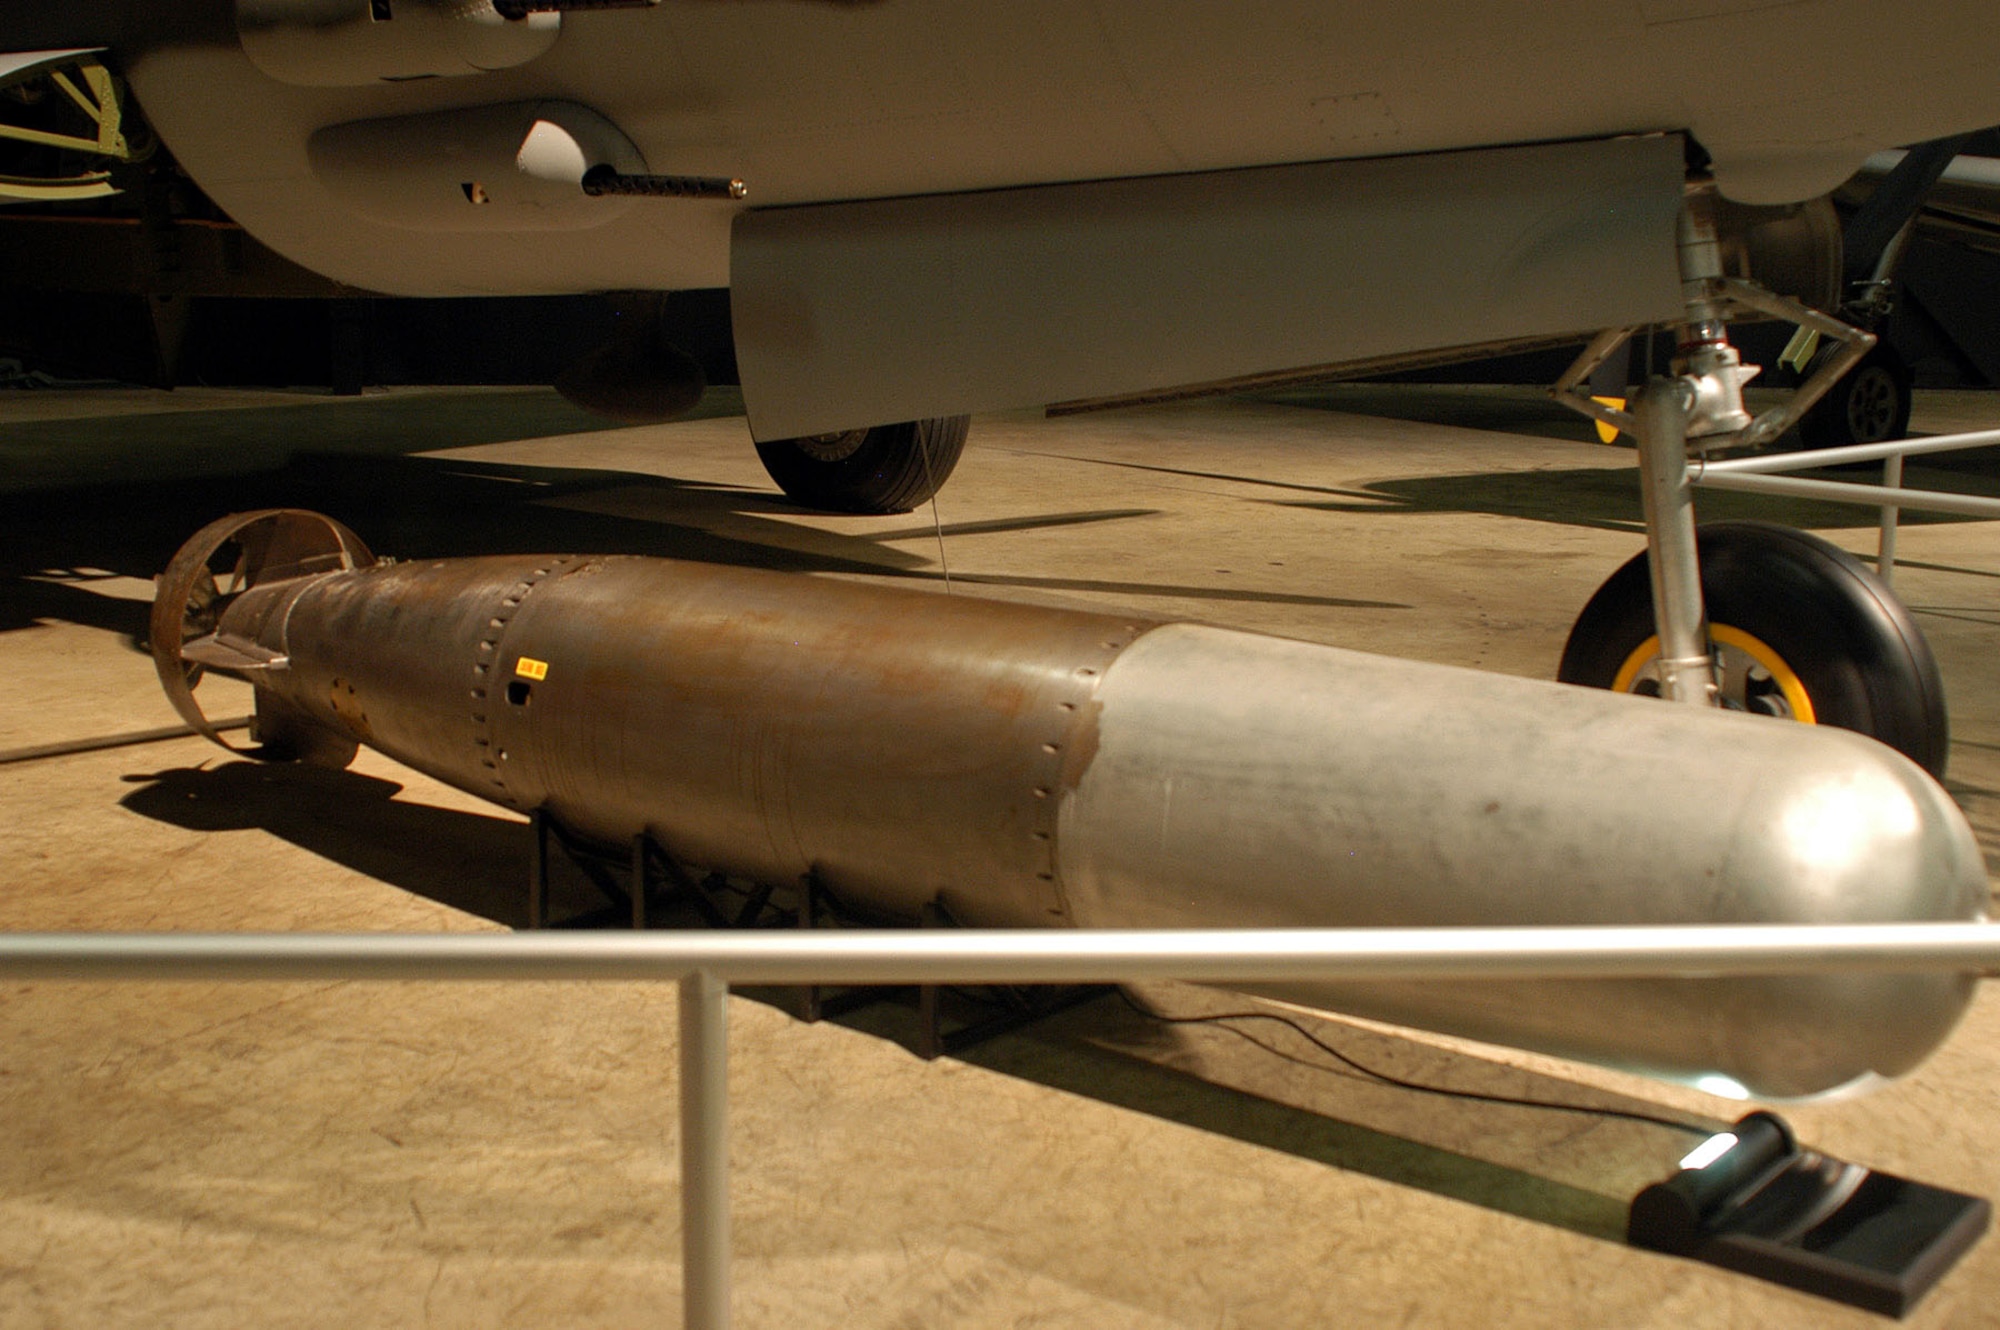 DAYTON, Ohio -- Mark 13 Torpedo on display in the World War II Gallery at the National Museum of the United States Air Force. (U.S. Air Force photo)